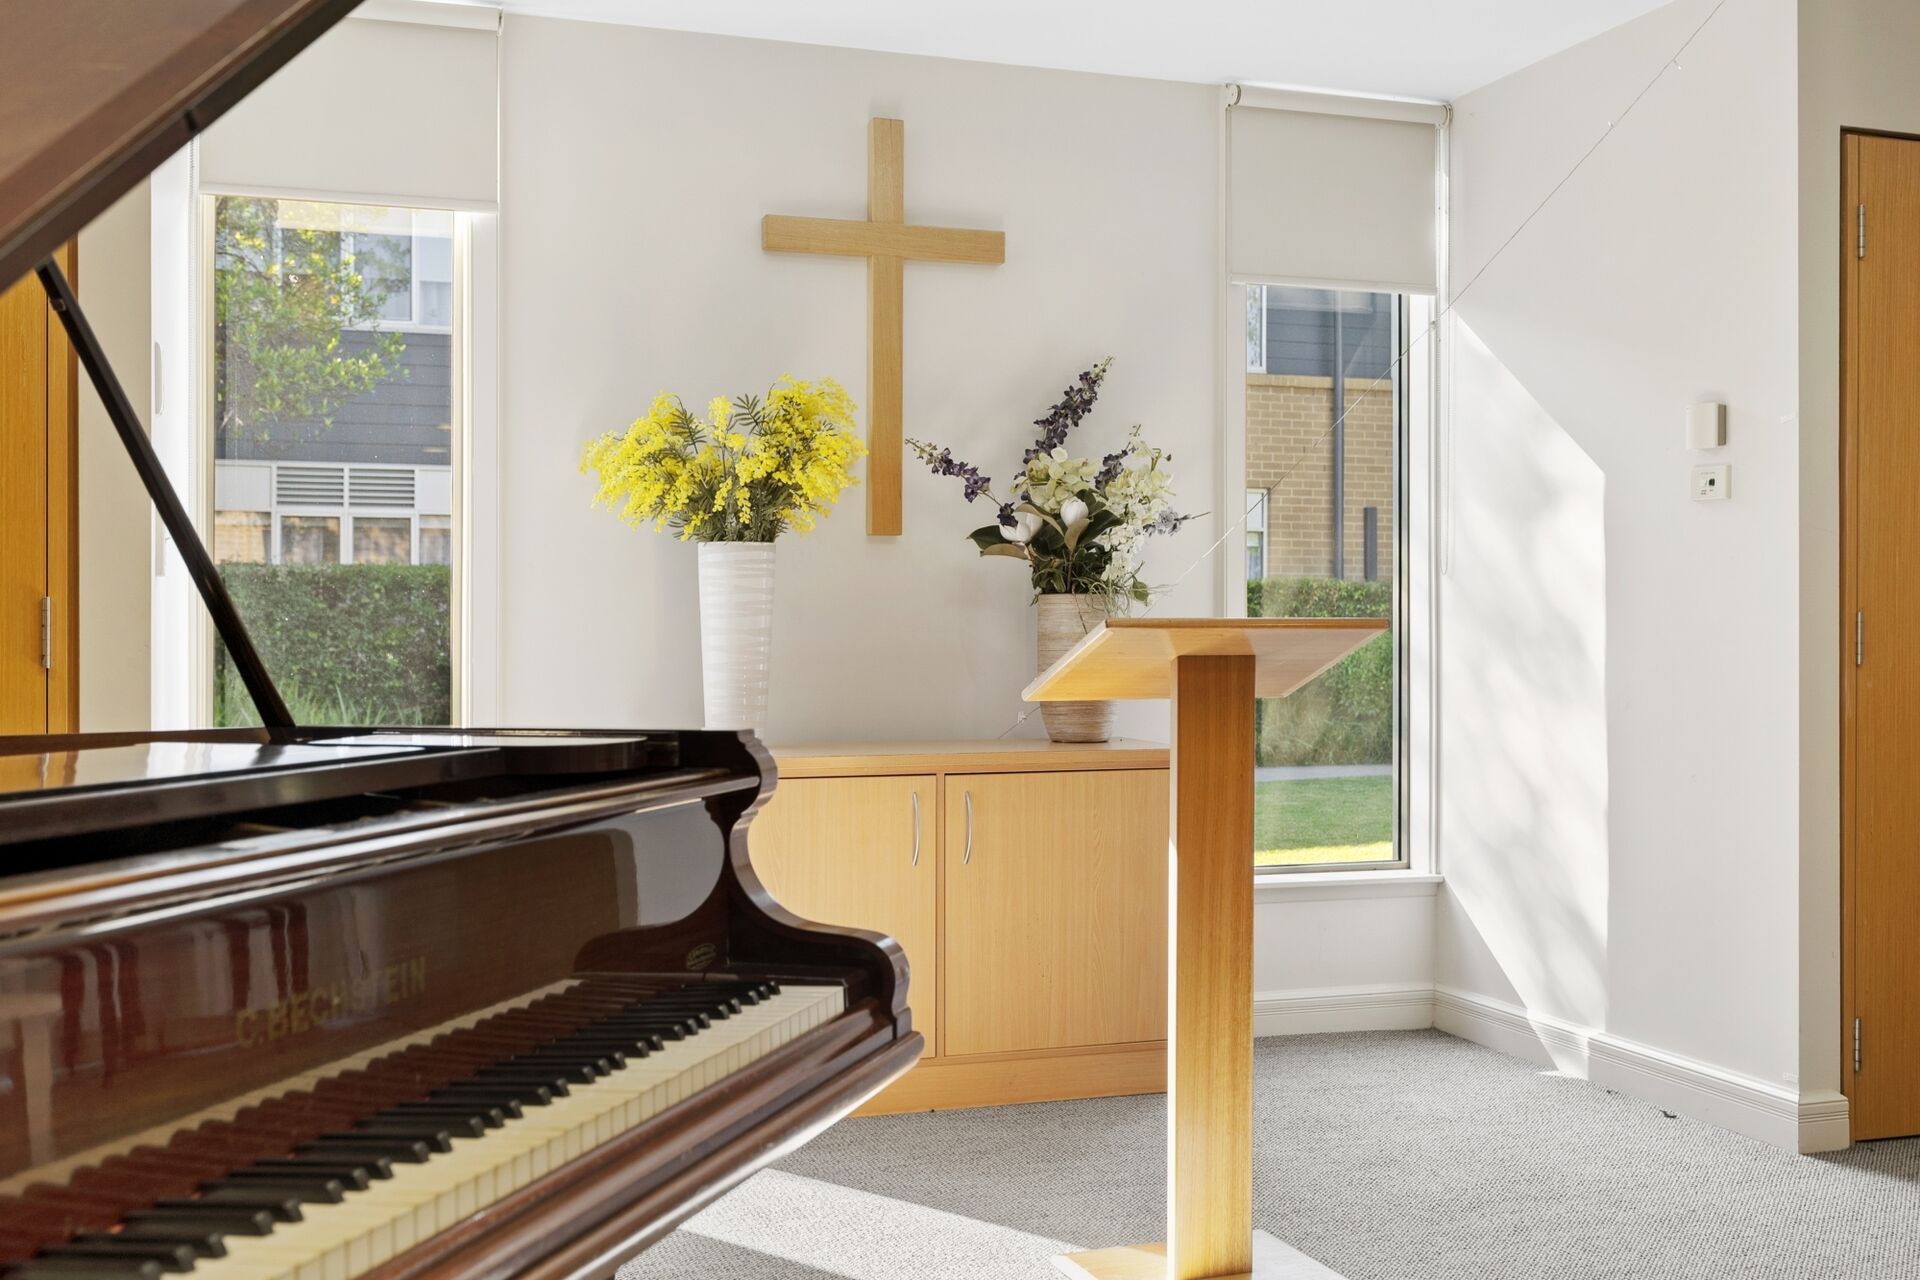 Chapel at baptistcare shalom centre aged care home in macquarie park nsw